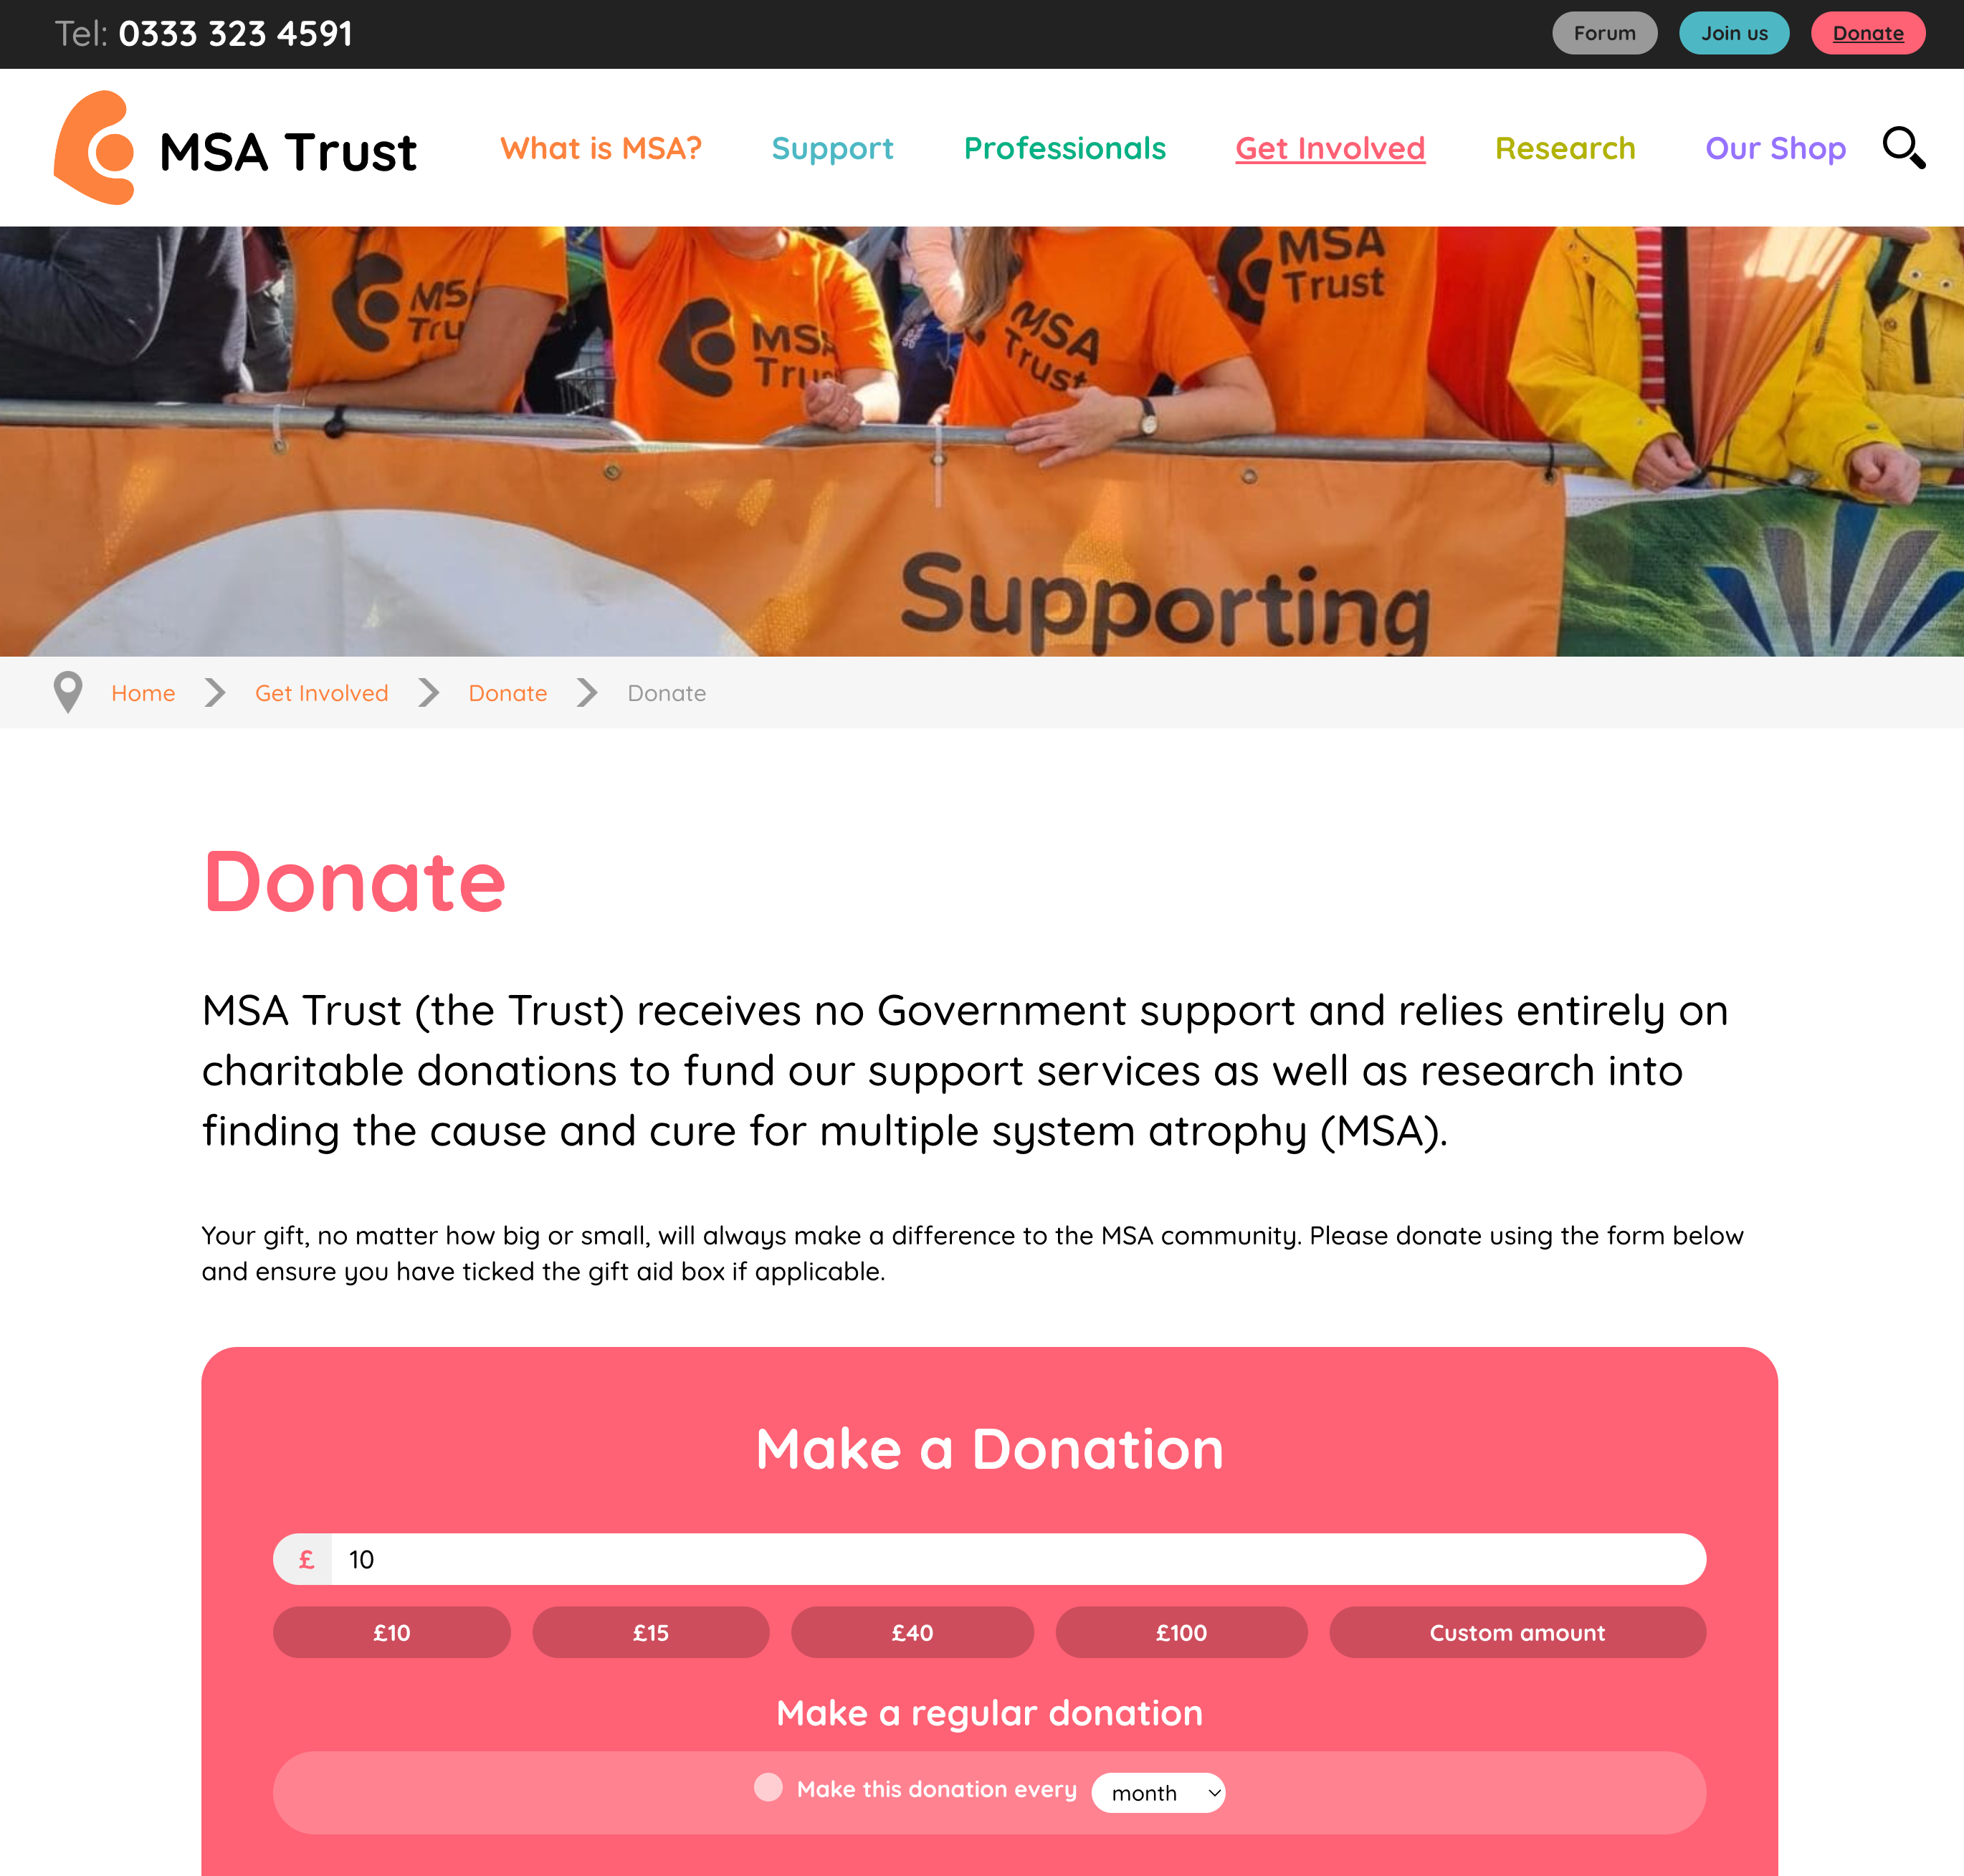 MSA Trust Donate Page with Form